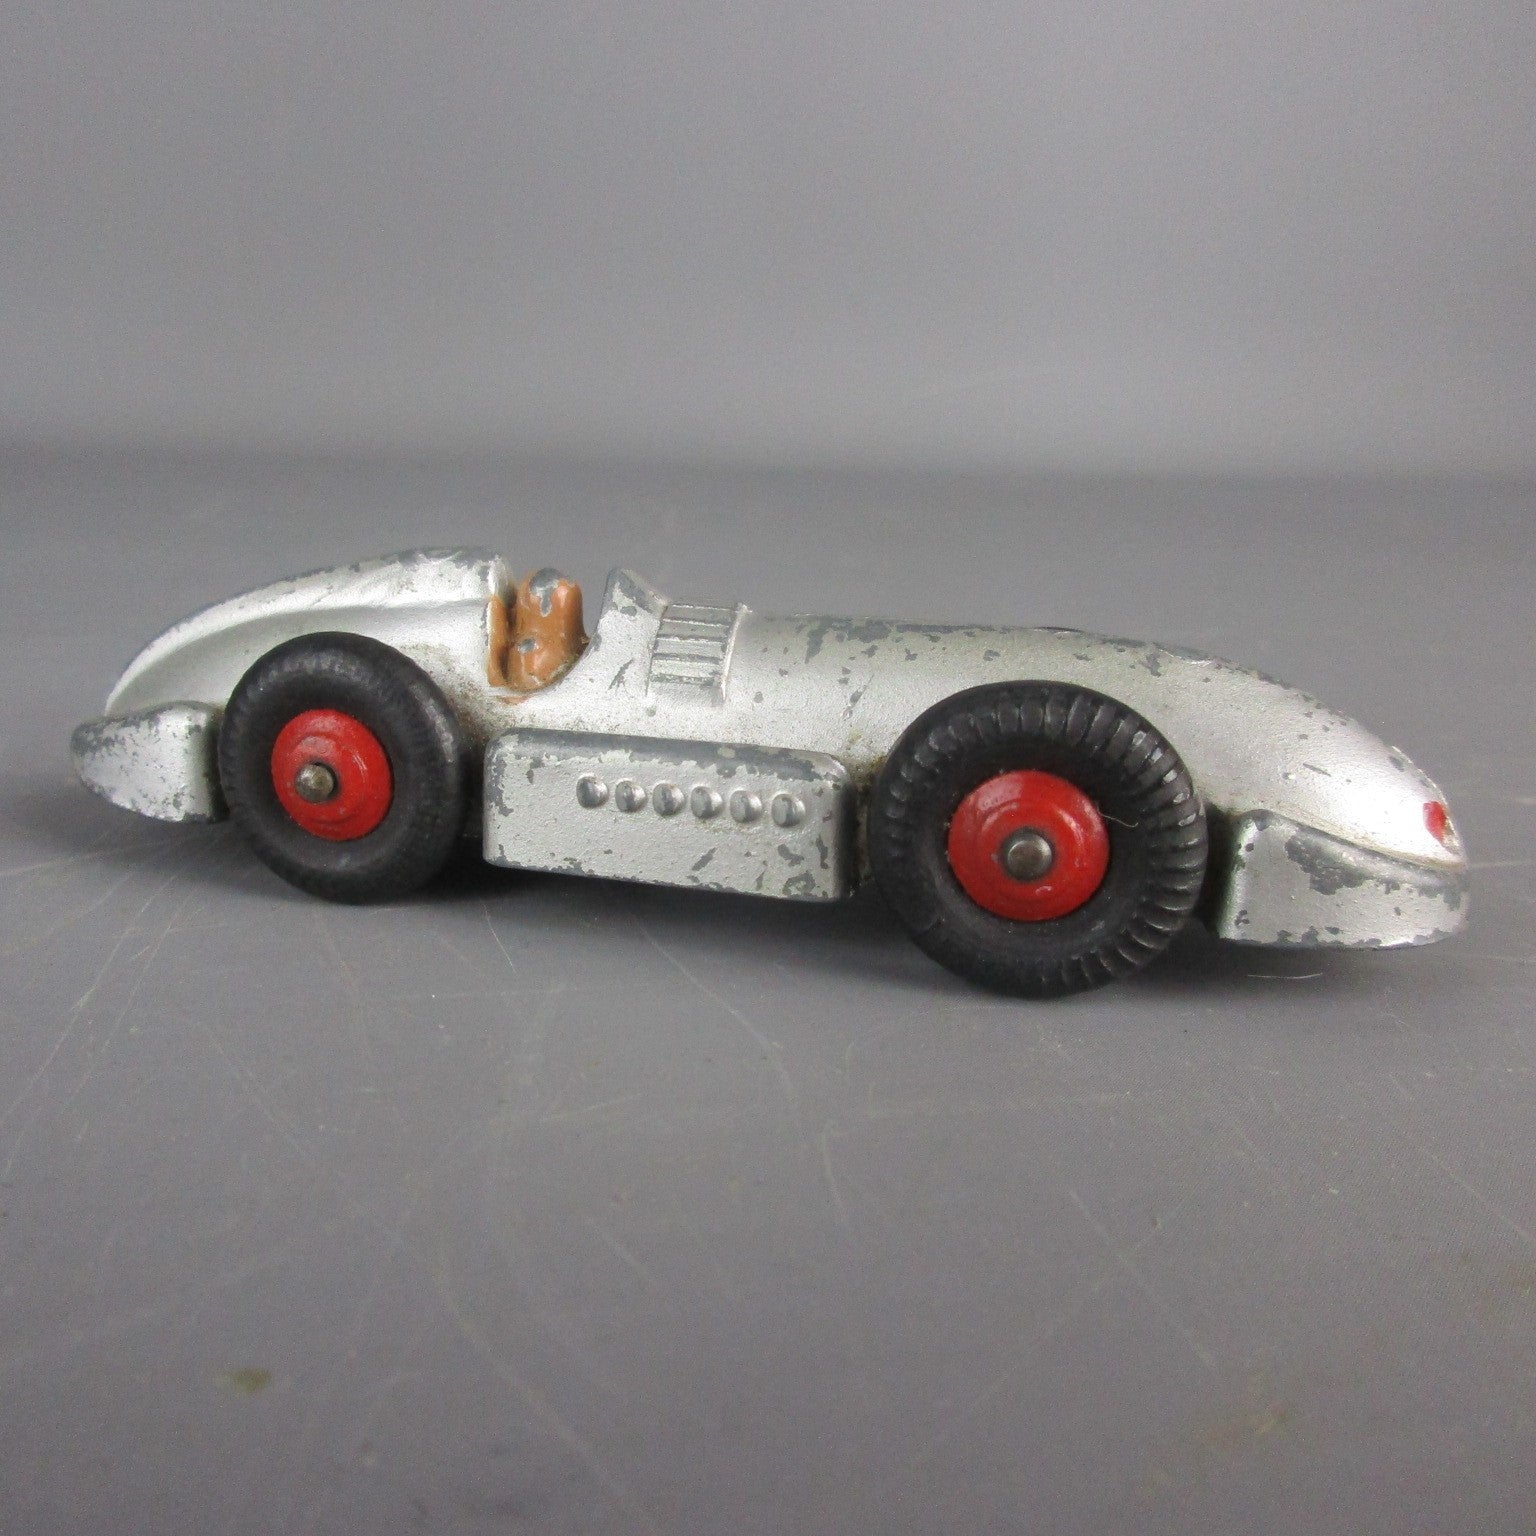 Dinky Toys 'Speed Of The Wind' Meccano Racing Car Vintage